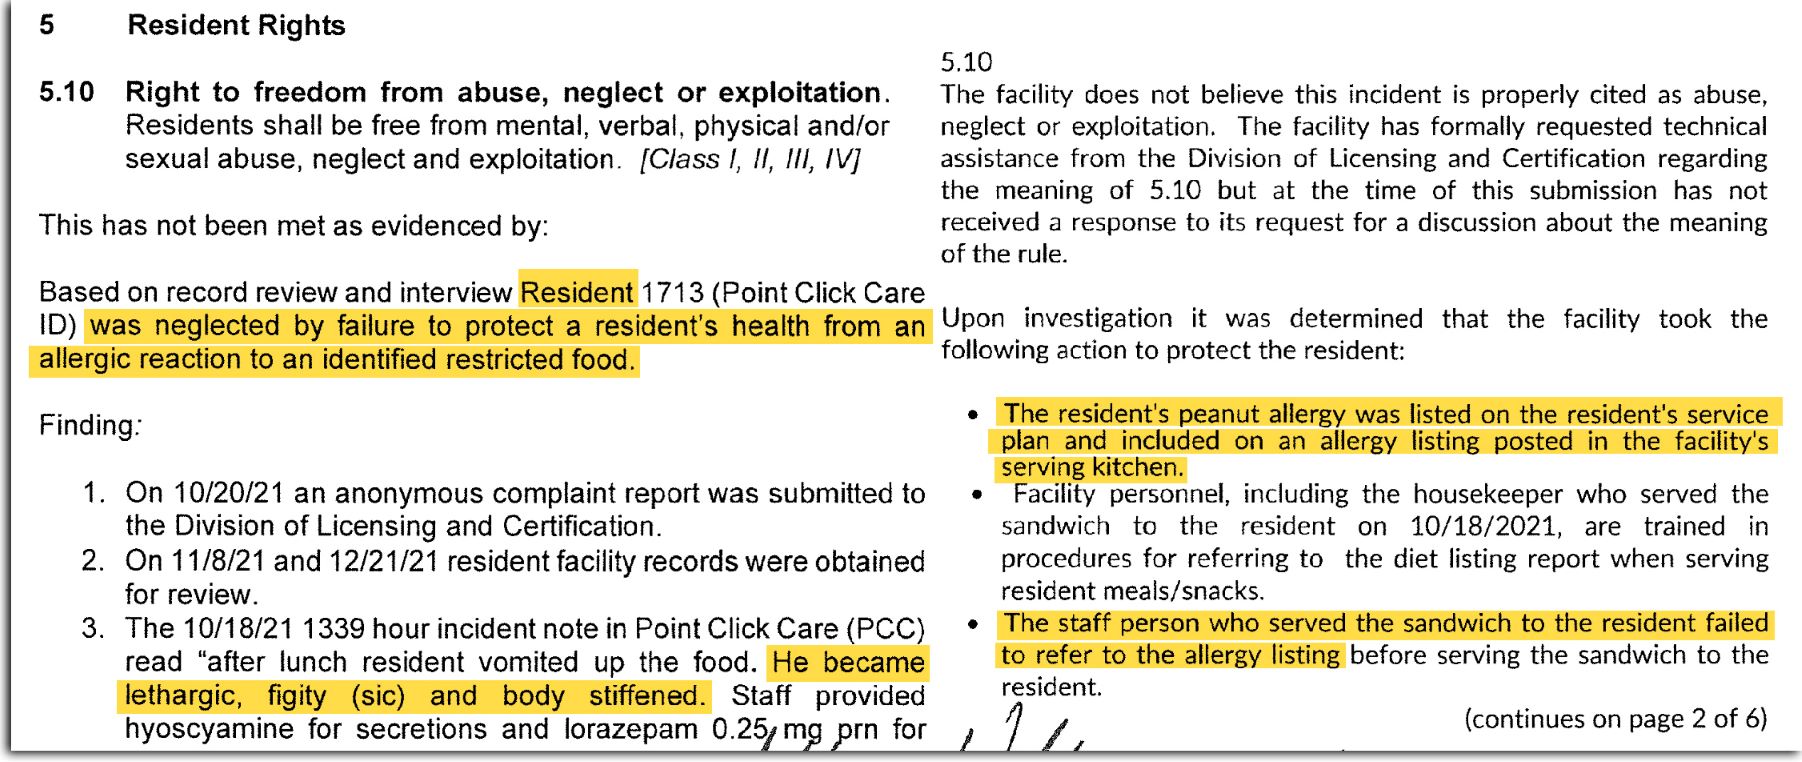 A portion of a Maine DHHS report about the allergy incident. The document notes, in part, that the resident was neglected by failure to protect a resident's health from an allergic reaction to an identified restricted food. The report also notes the resident became lethargic, fidgety and body stiffened after vomiting up lunch. The resident's  peanut allergy, the report says, was listed on the resident's service plan and included on an allergy listing posted in the facility's serving kitchen. The staff person who served the sandwich to the resident failed to refer to the allergy listing before serving the sandwich to the resident, the report reads.